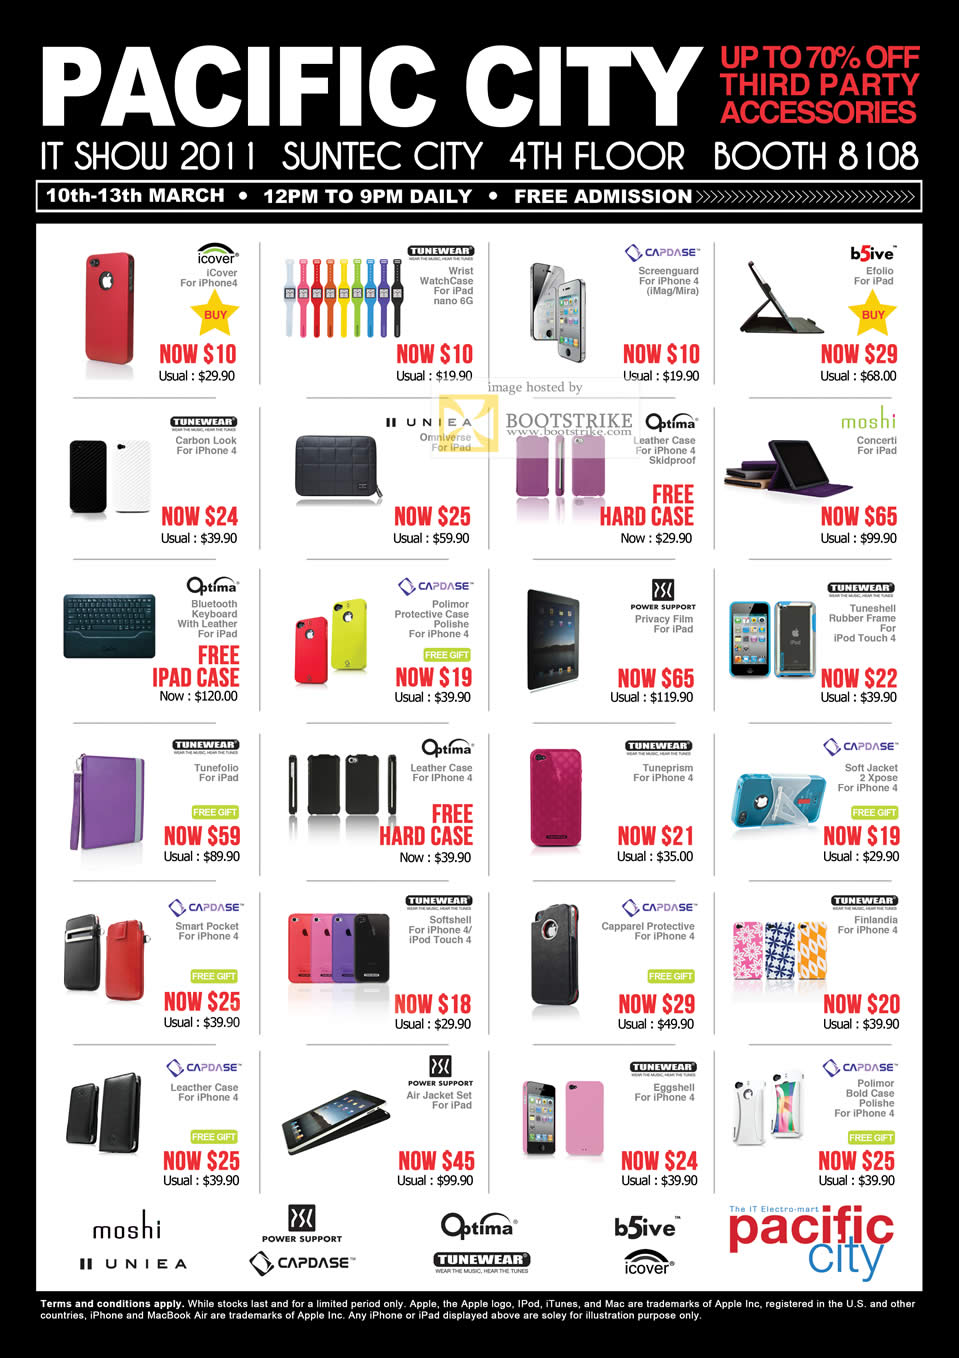 IT Show 2011 price list image brochure of ECS Pacific City Accessories IPhone4 IPad Case Capdase B5ive Tunewear Icover Uniea Optima Moshi Optima Power Support Screen Protector